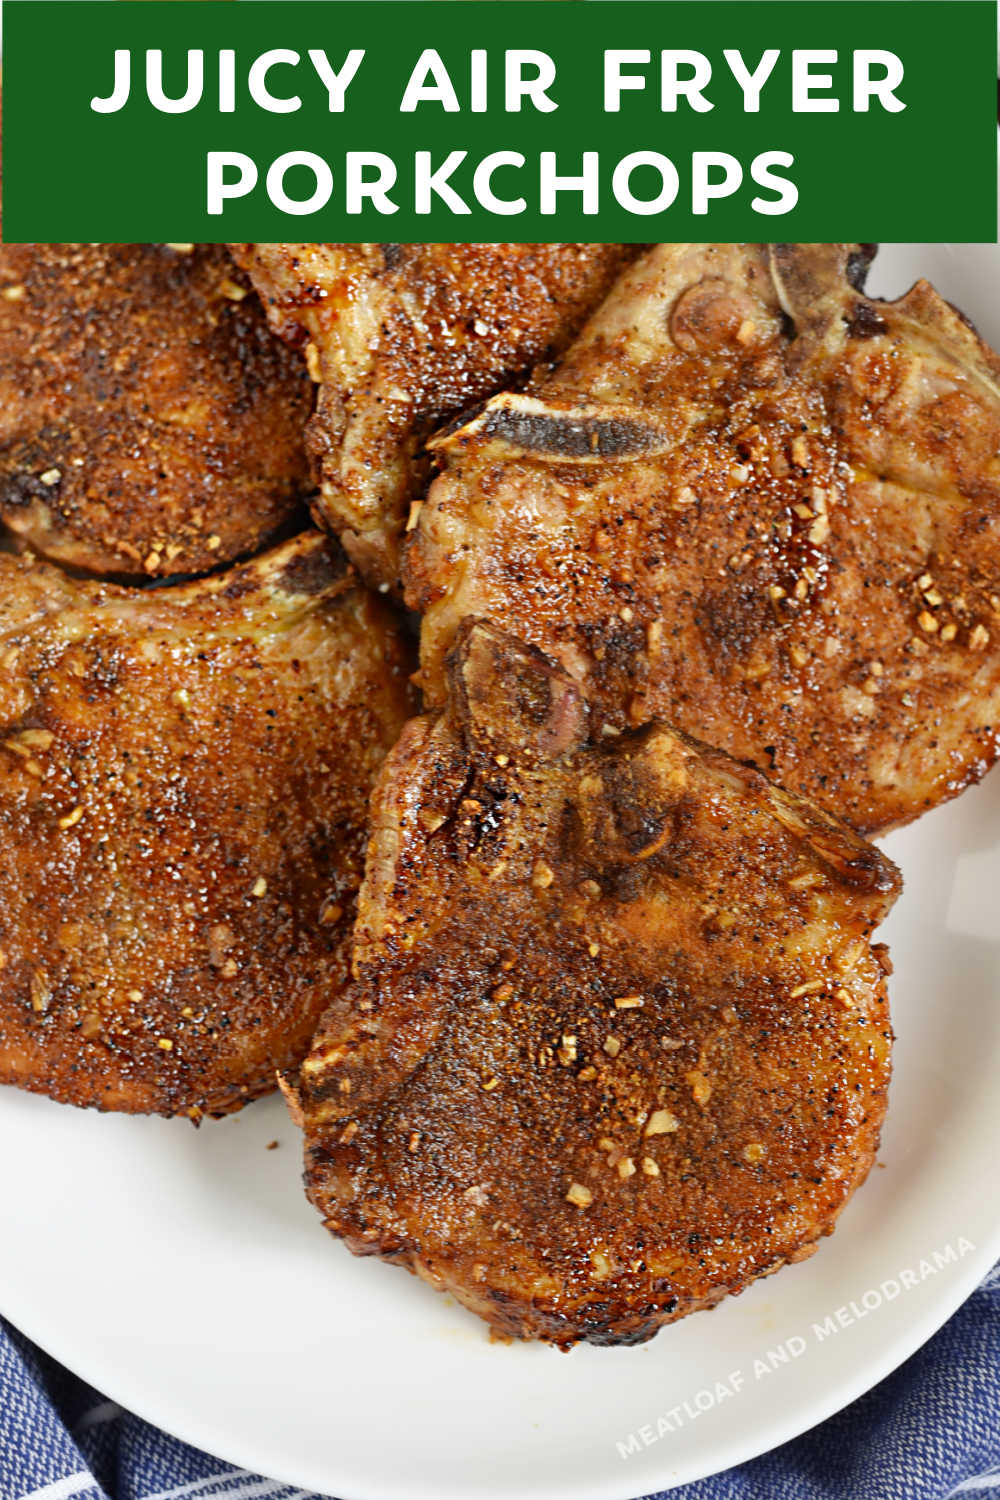 This easy Air Fryer Pork Chops recipe starts with a simple dry rub and makes the best tender juicy pork chops in 20 minutes! An easy dinner for busy weeknights that your whole family will love! via @meamel